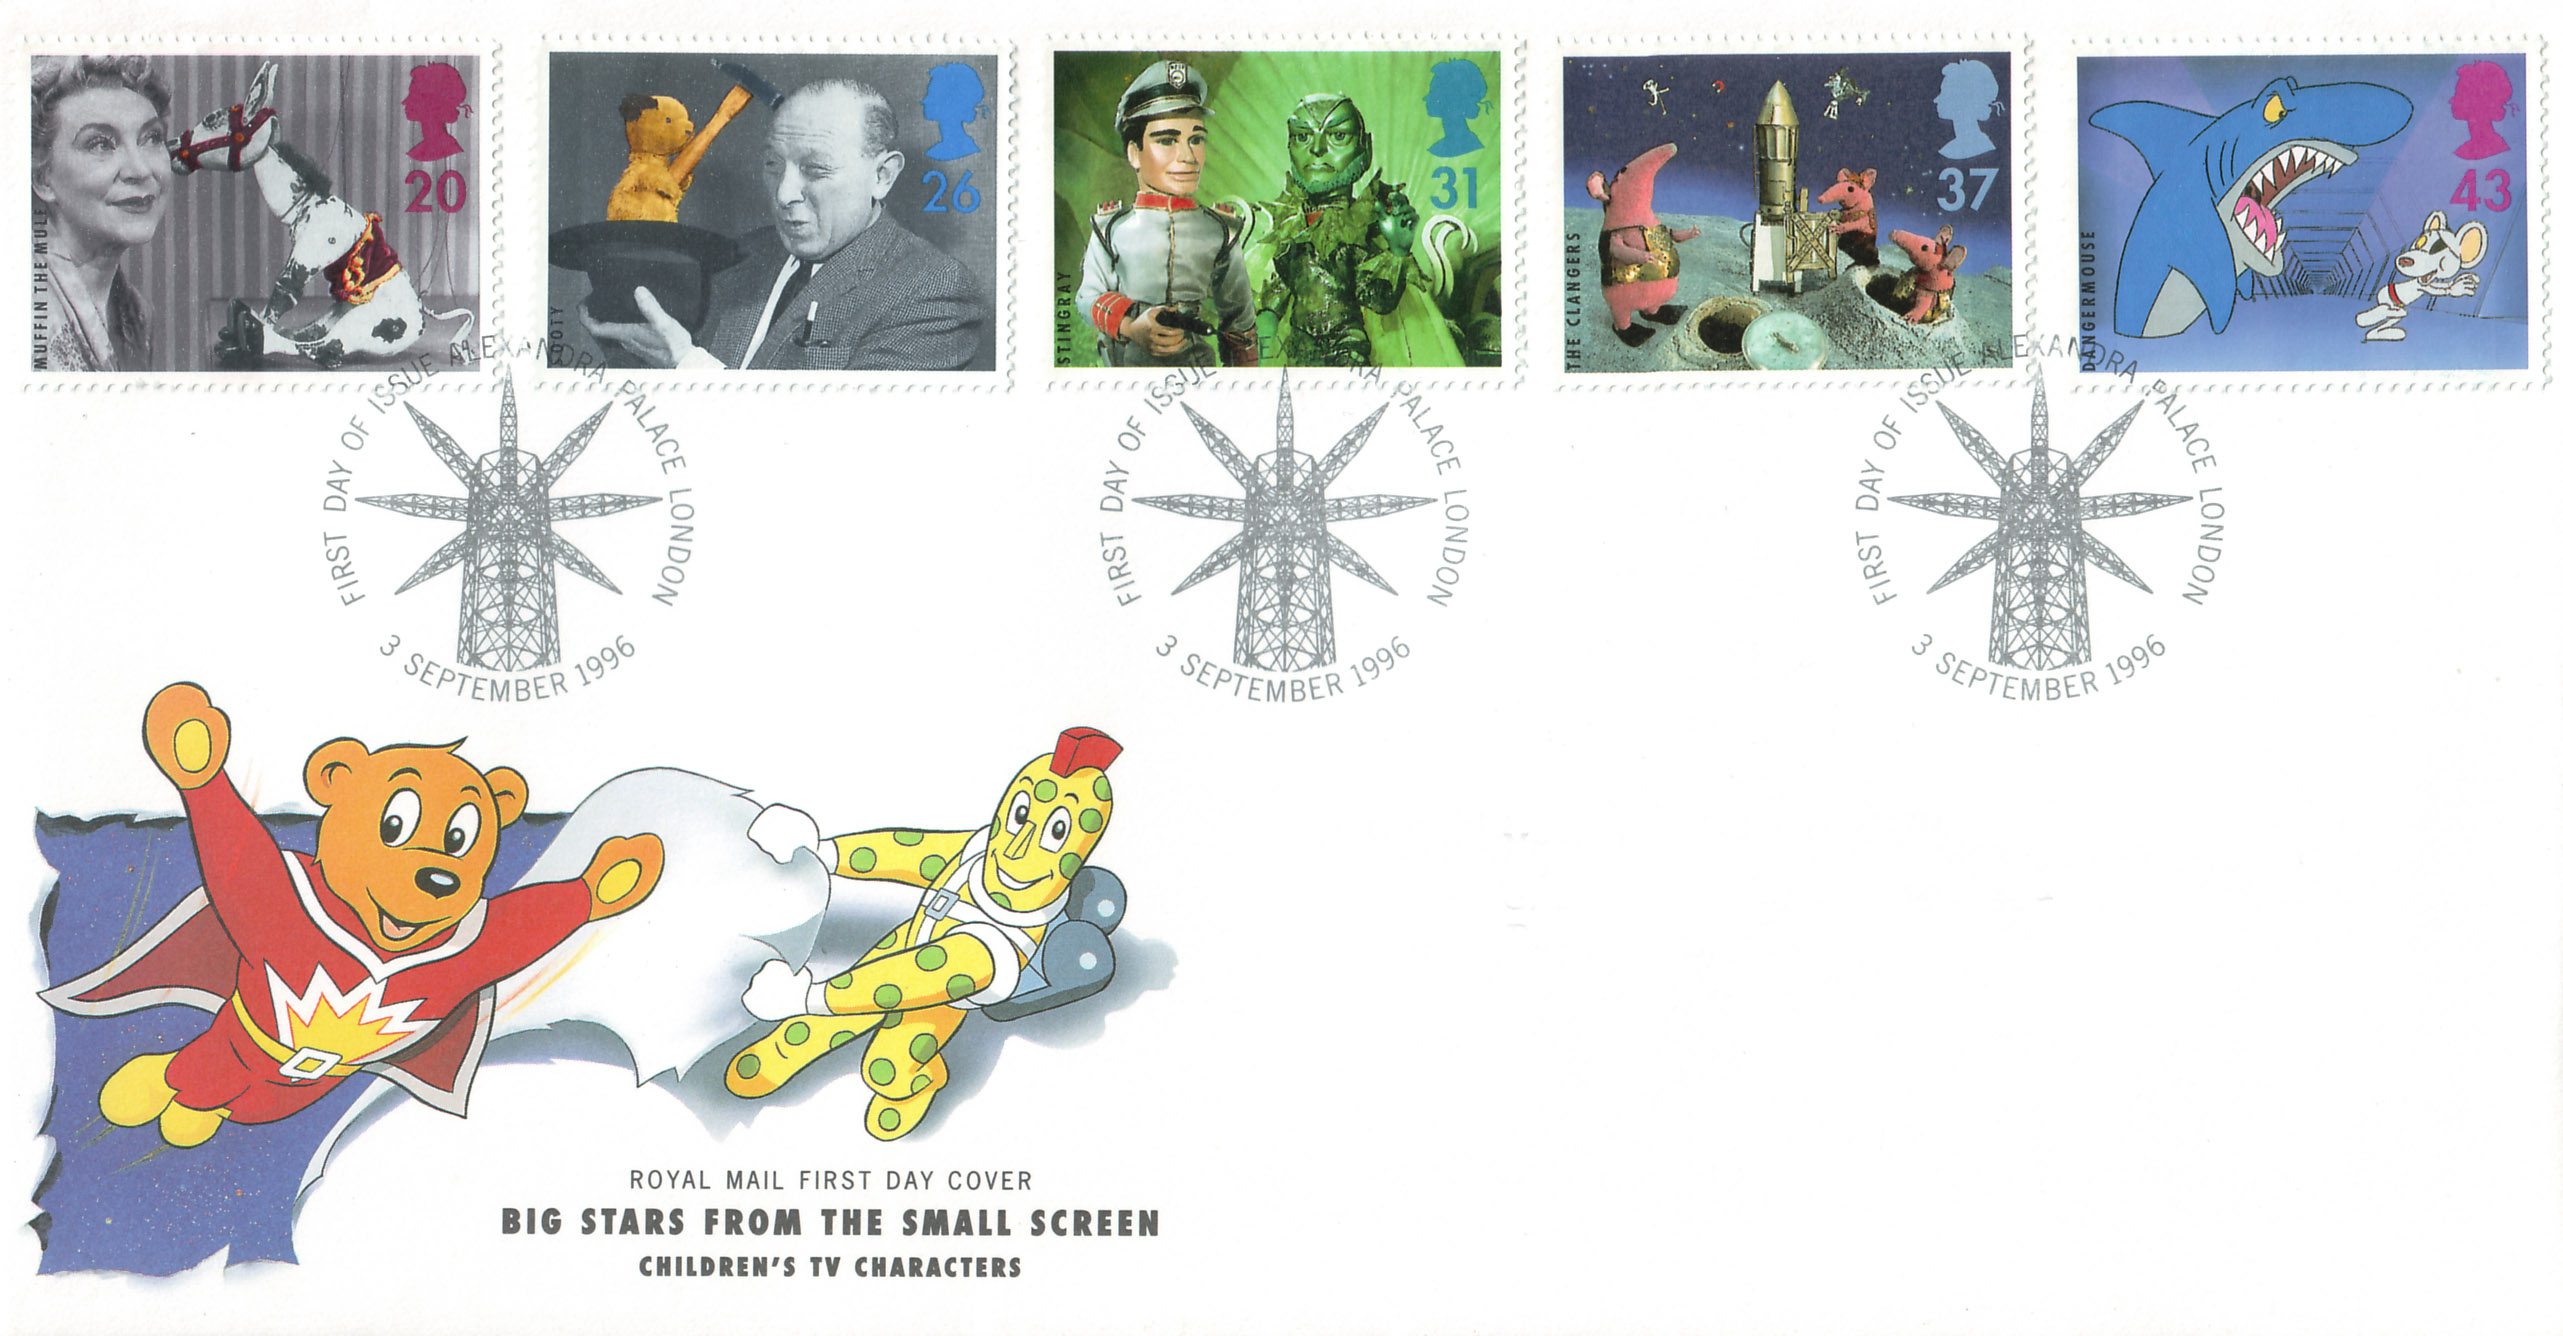 mint stamps British TV vintage stamps children's TV cartoons Royal Mail Big Stars from the Small Screen 1996 Dangermouse stamp